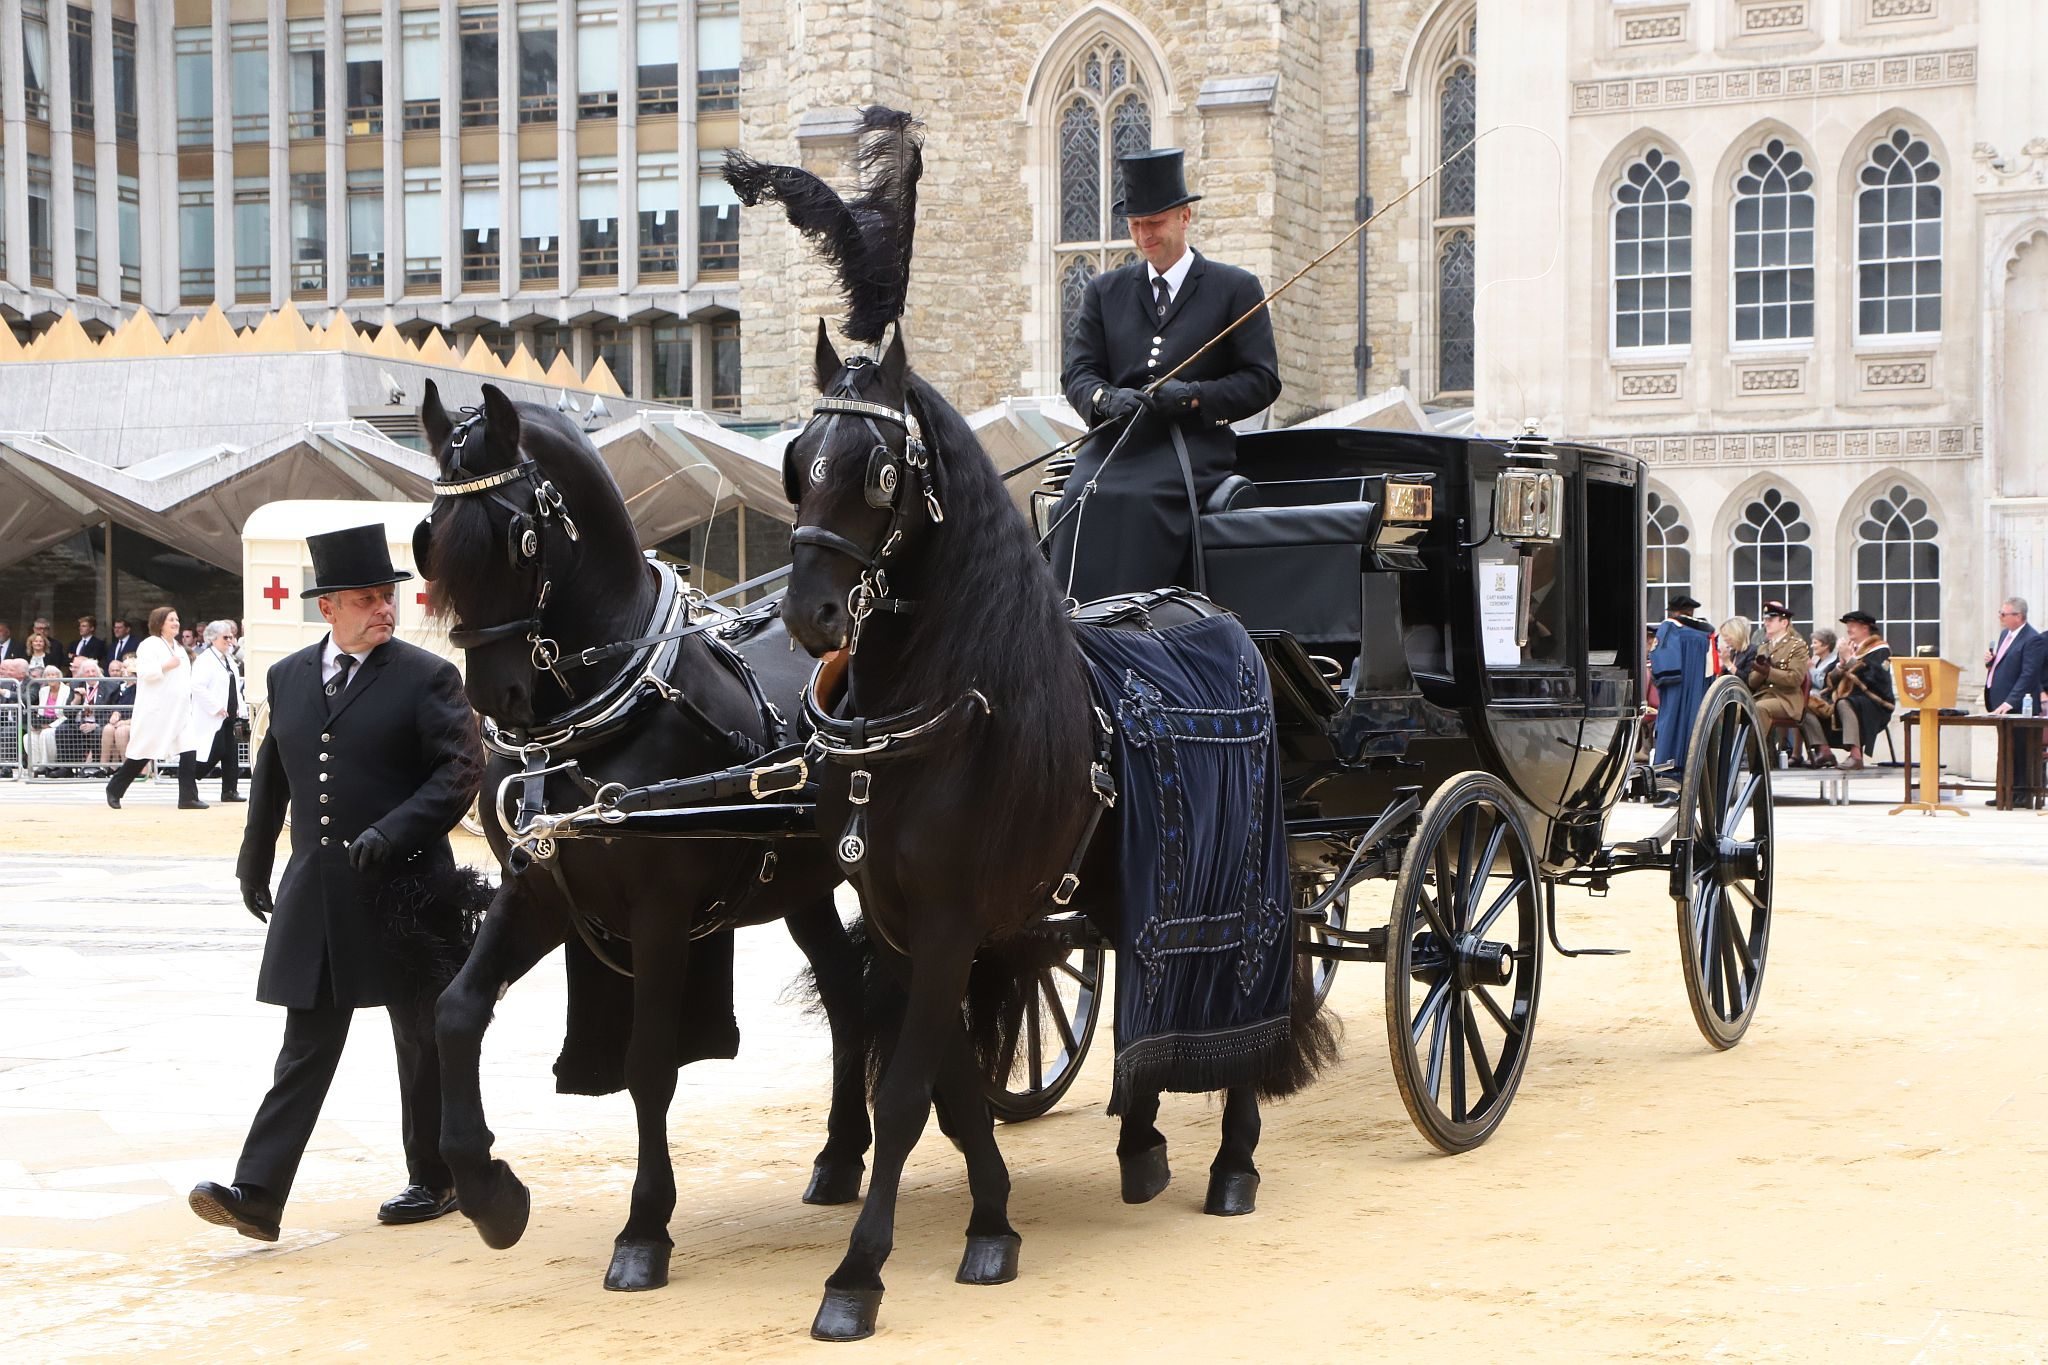 Horse Drawn Marsden Mourning Coach 1890. City of London 2023 Cart Marking in Guildhall Yard on 22-Jul-2023. Hosted by the Worshipful Company of Carmen with the Lord Mayor of the City of London in attendance. Wooden plates on the vehicles are branded with hot irons to allow them to ply for trade in the Square Mile. Another of the City Livery Company's annual ceremonies.